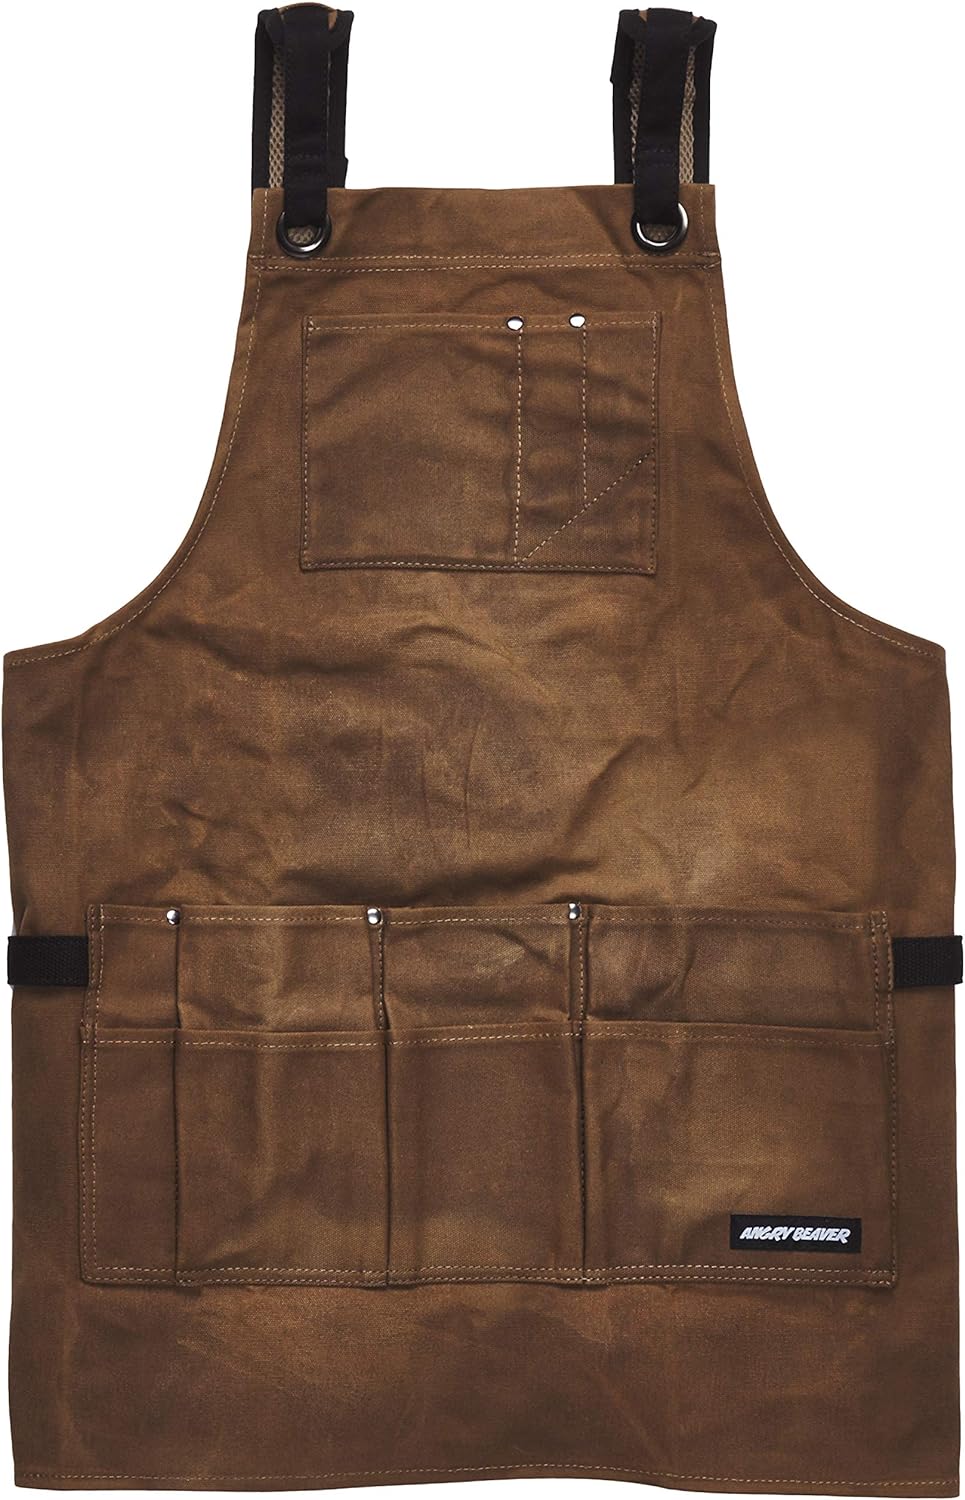 Angry Beaver Canvas Work Shop Apron